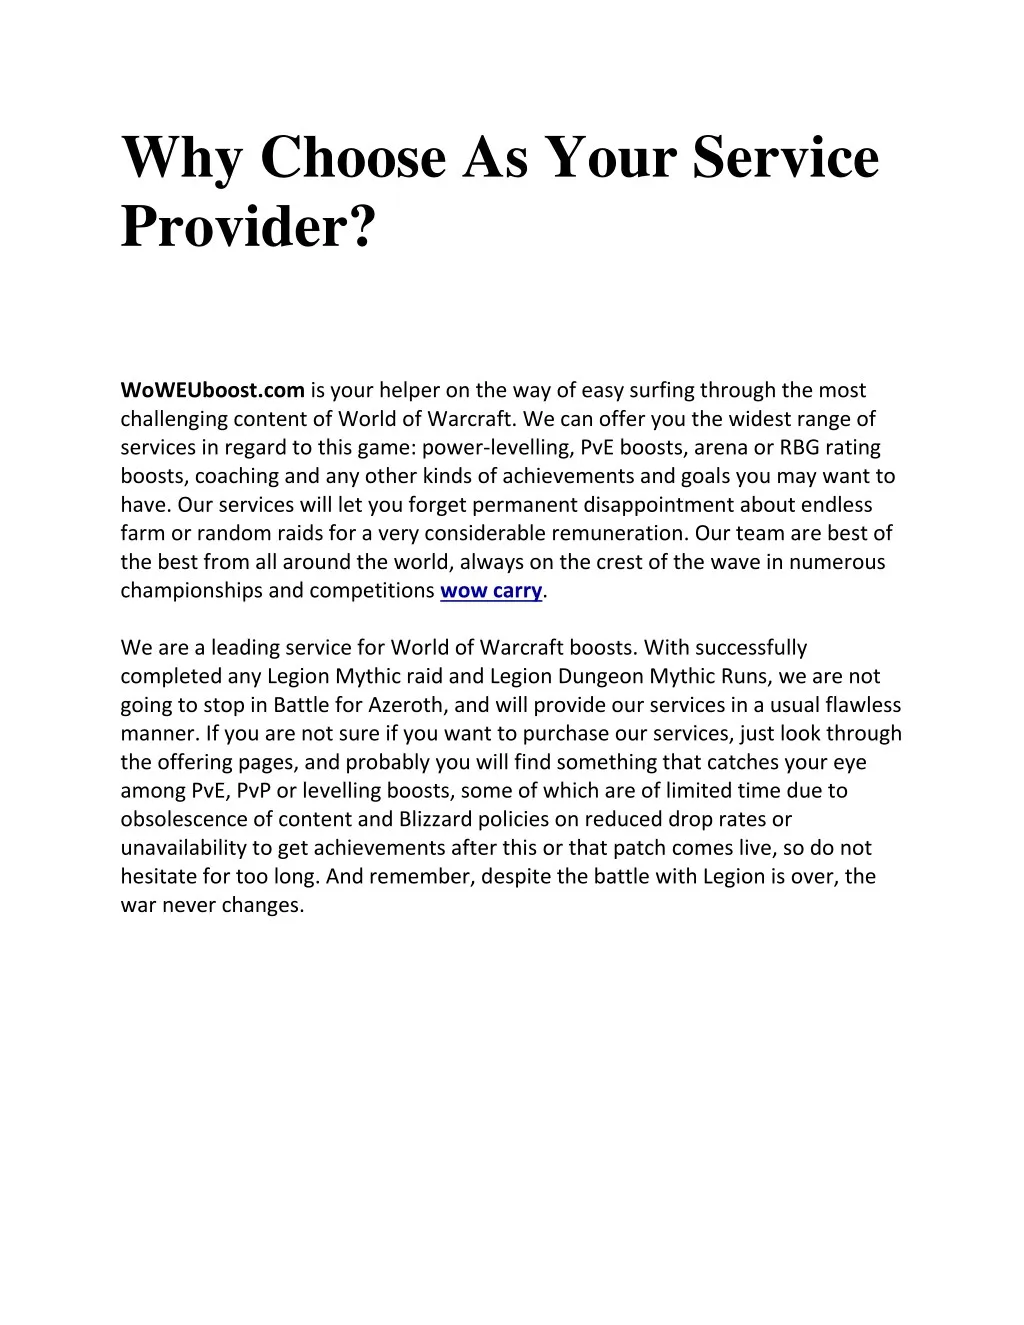 why choose as your service provider